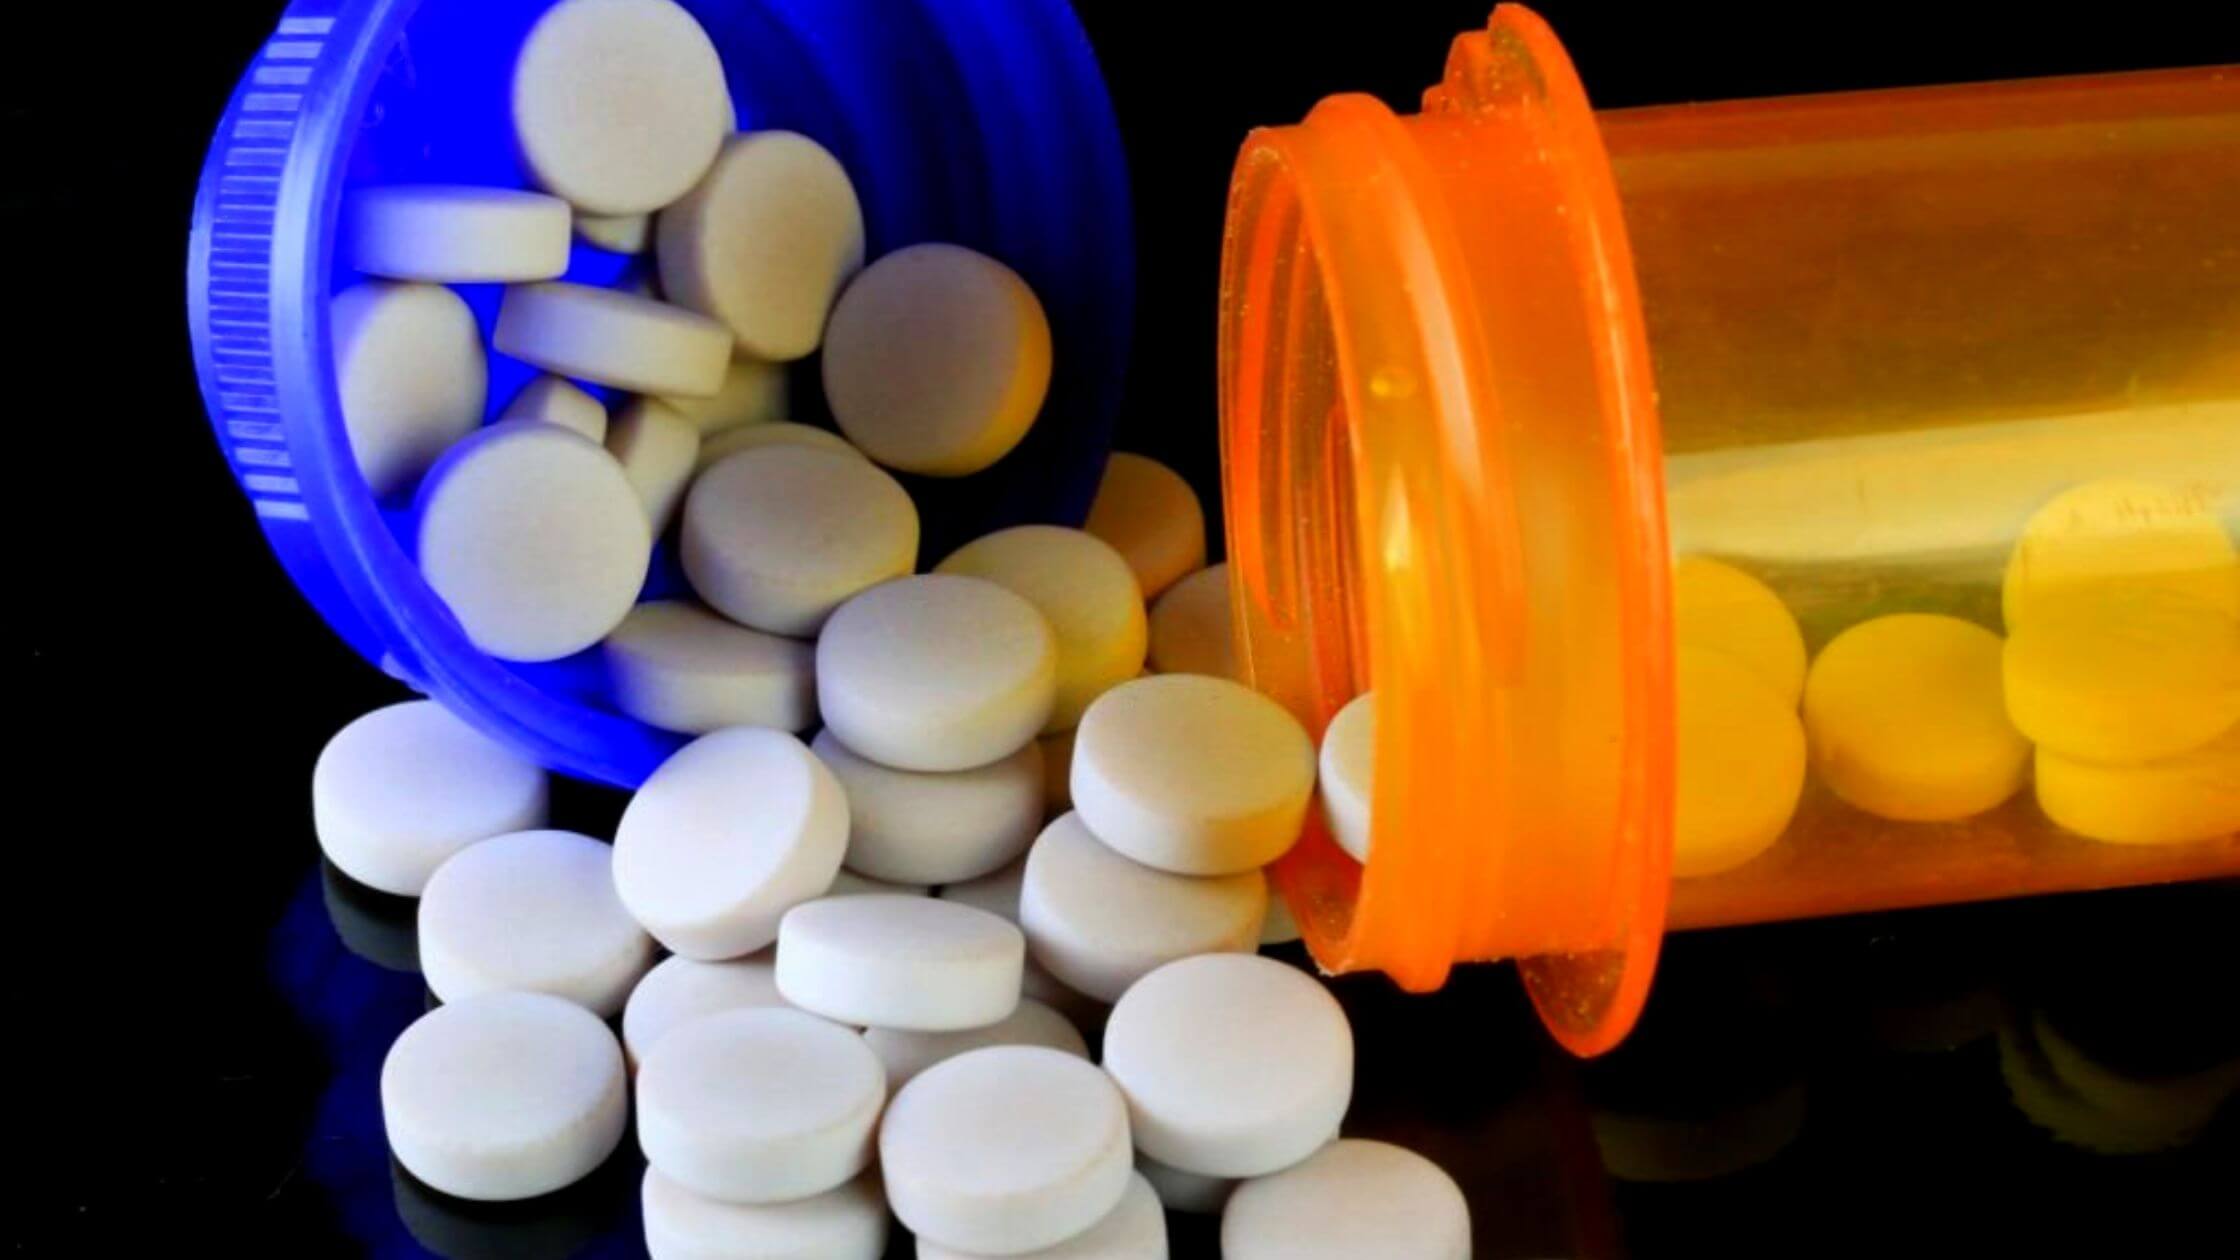 New Clinical Practise Recommendations For Prescribing Opioids For Pain- CDC